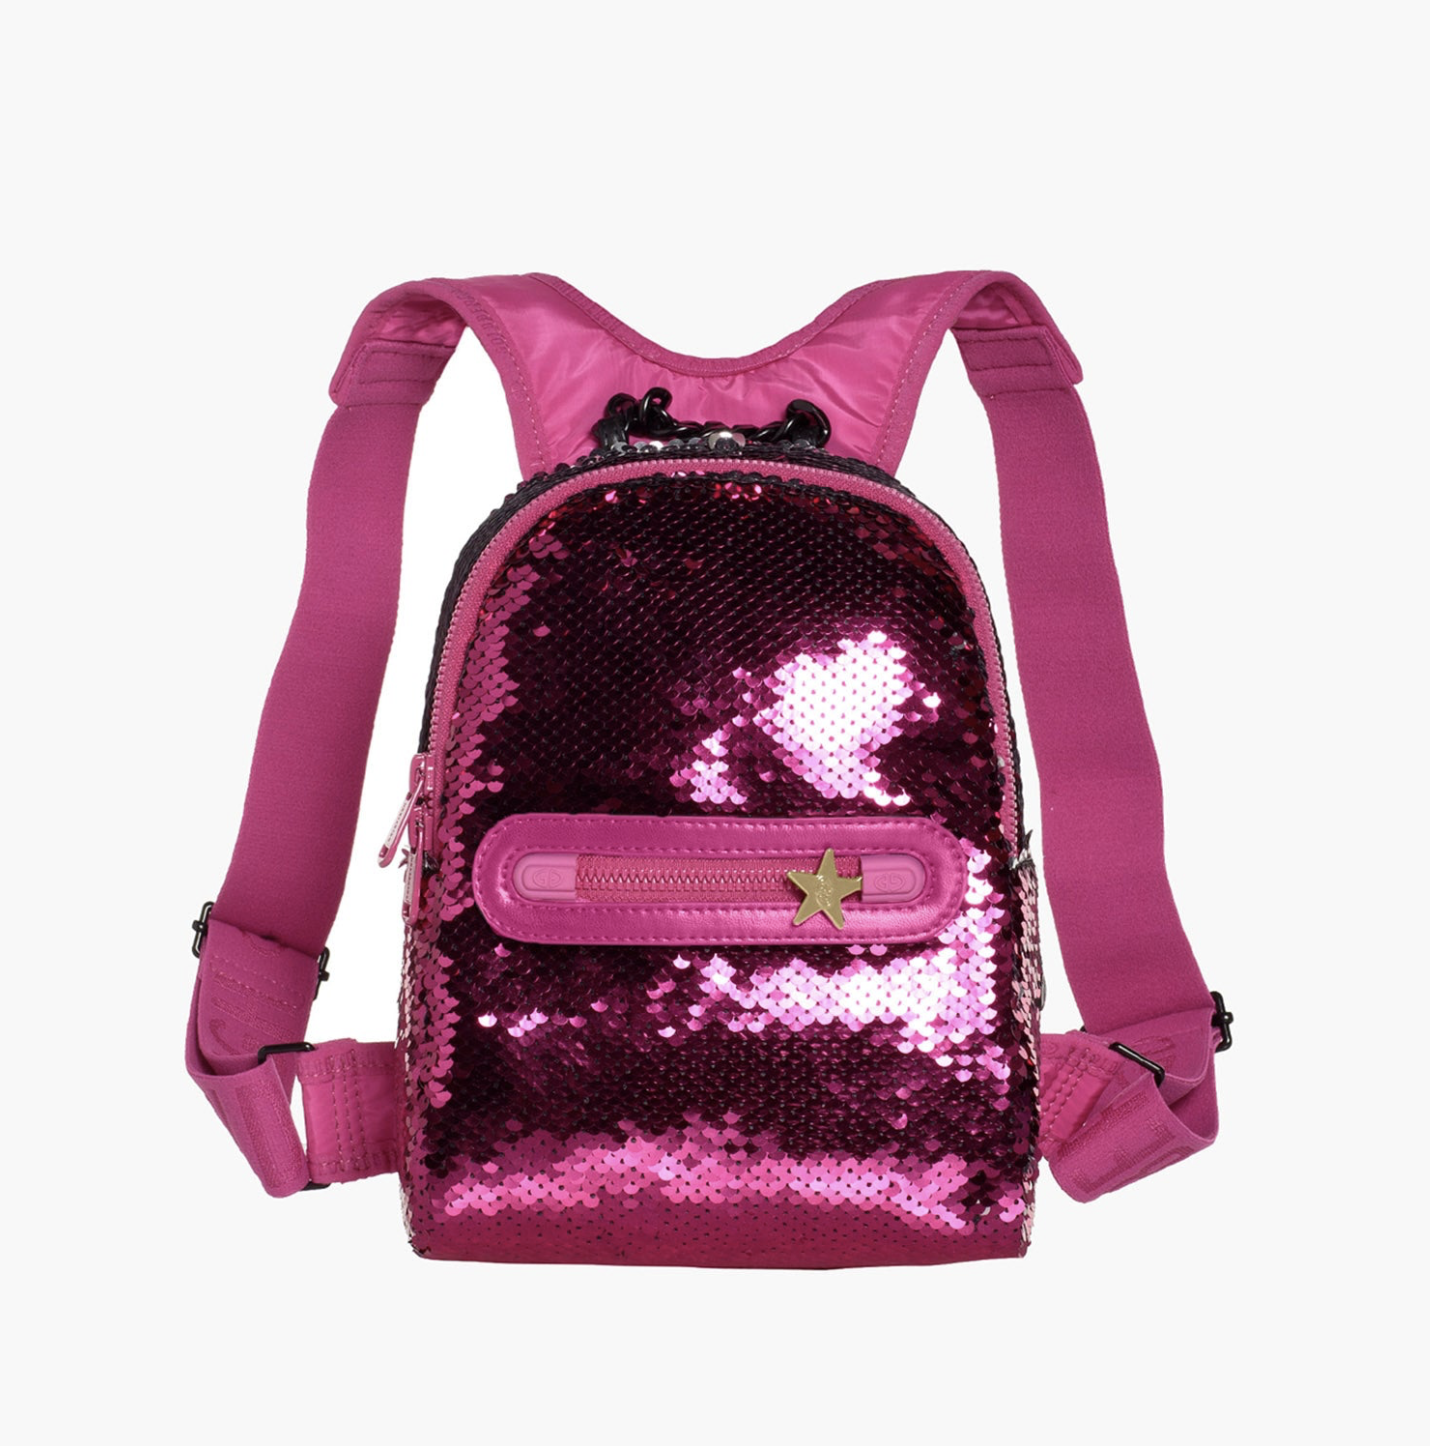 Goldbergh Lover Backpack passion pink 